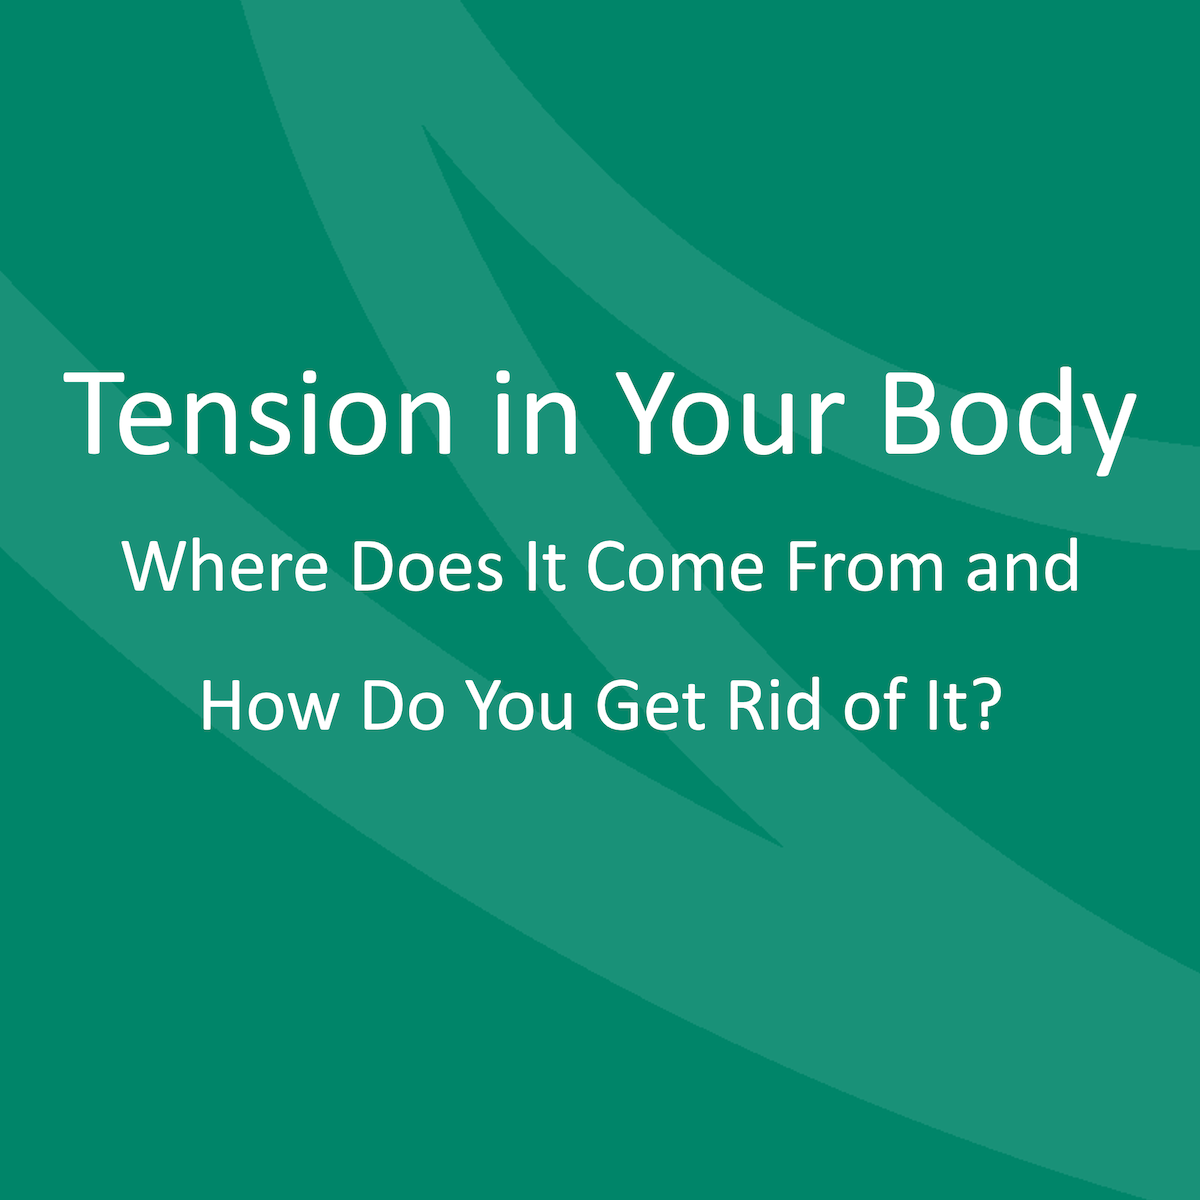 Tension in Your Body, Where Does It Come From and How Do You Get Rid of It?